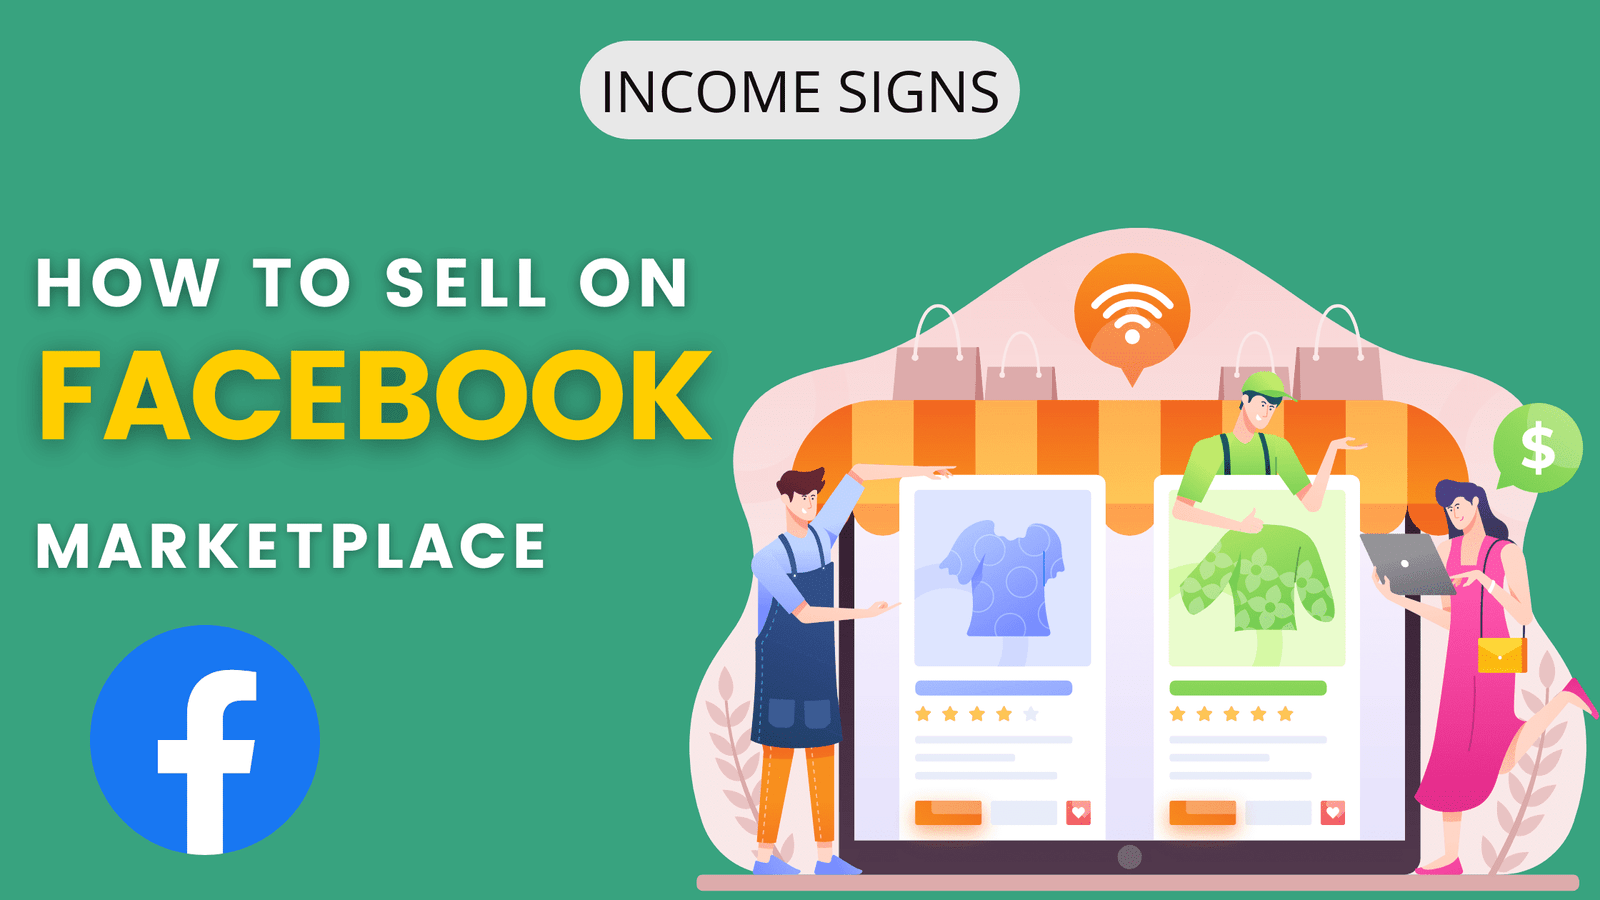 How To Sell on Facebook Marketplace